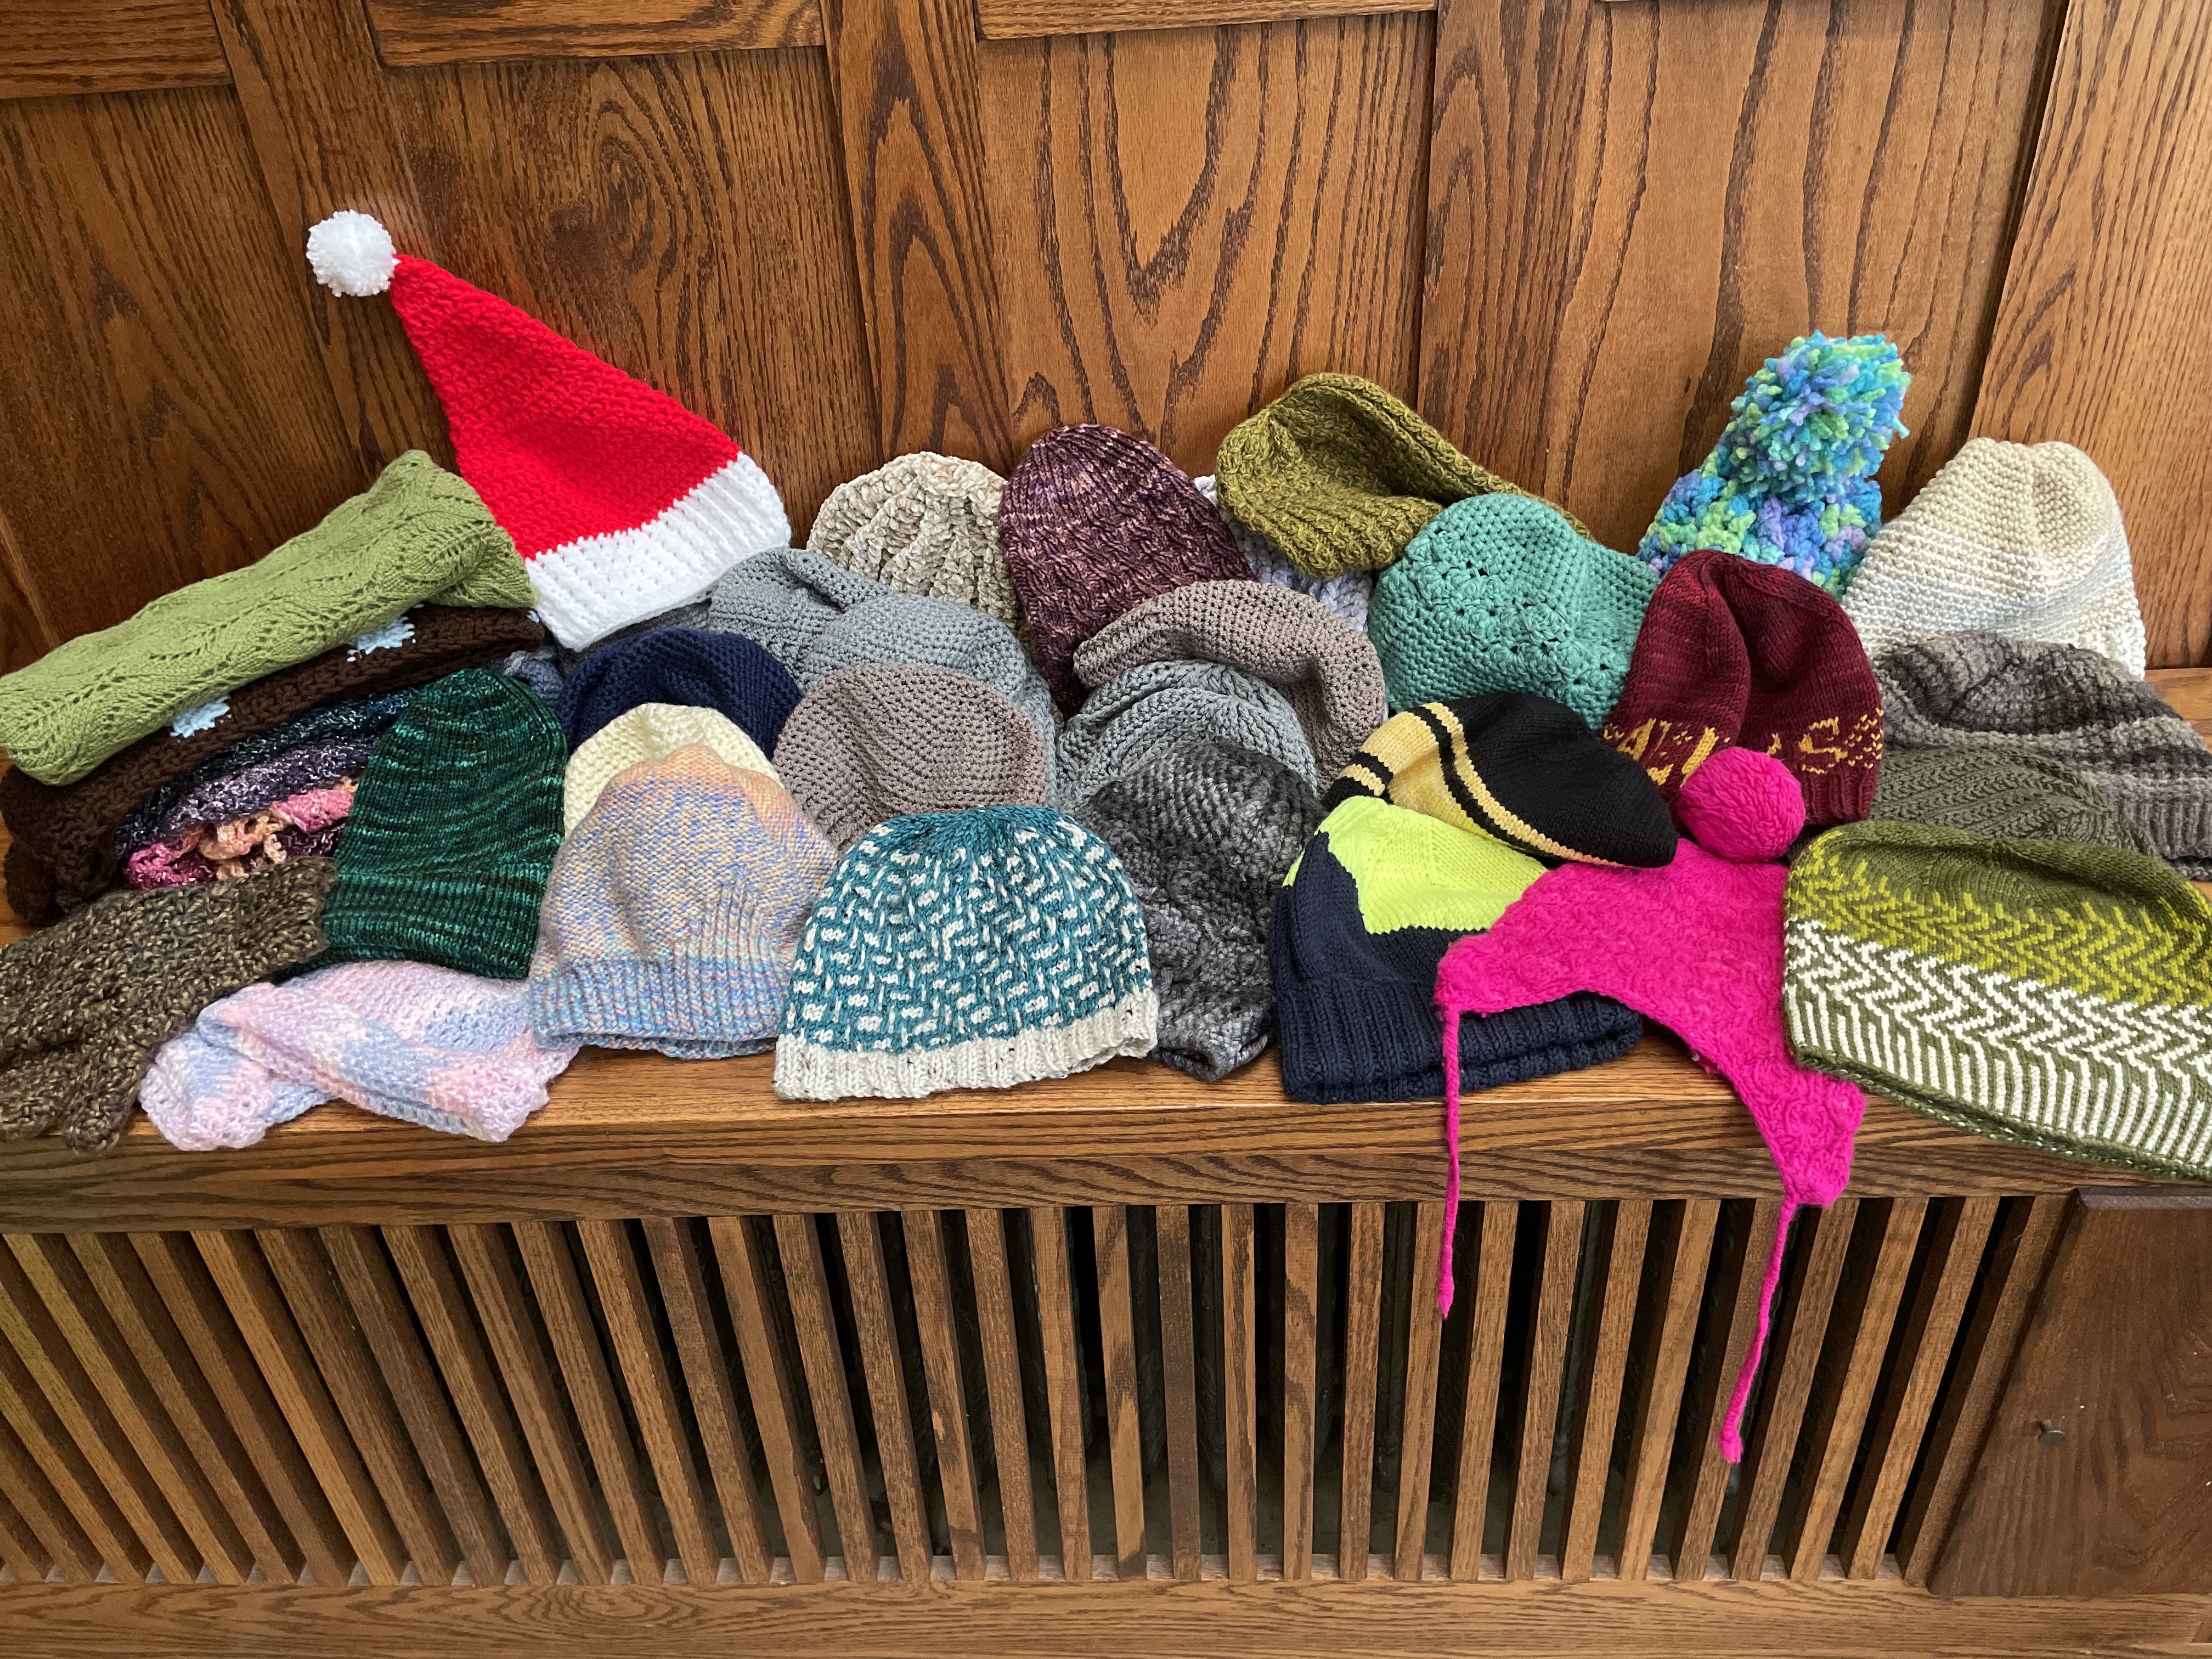 Knitted and crocheted donations